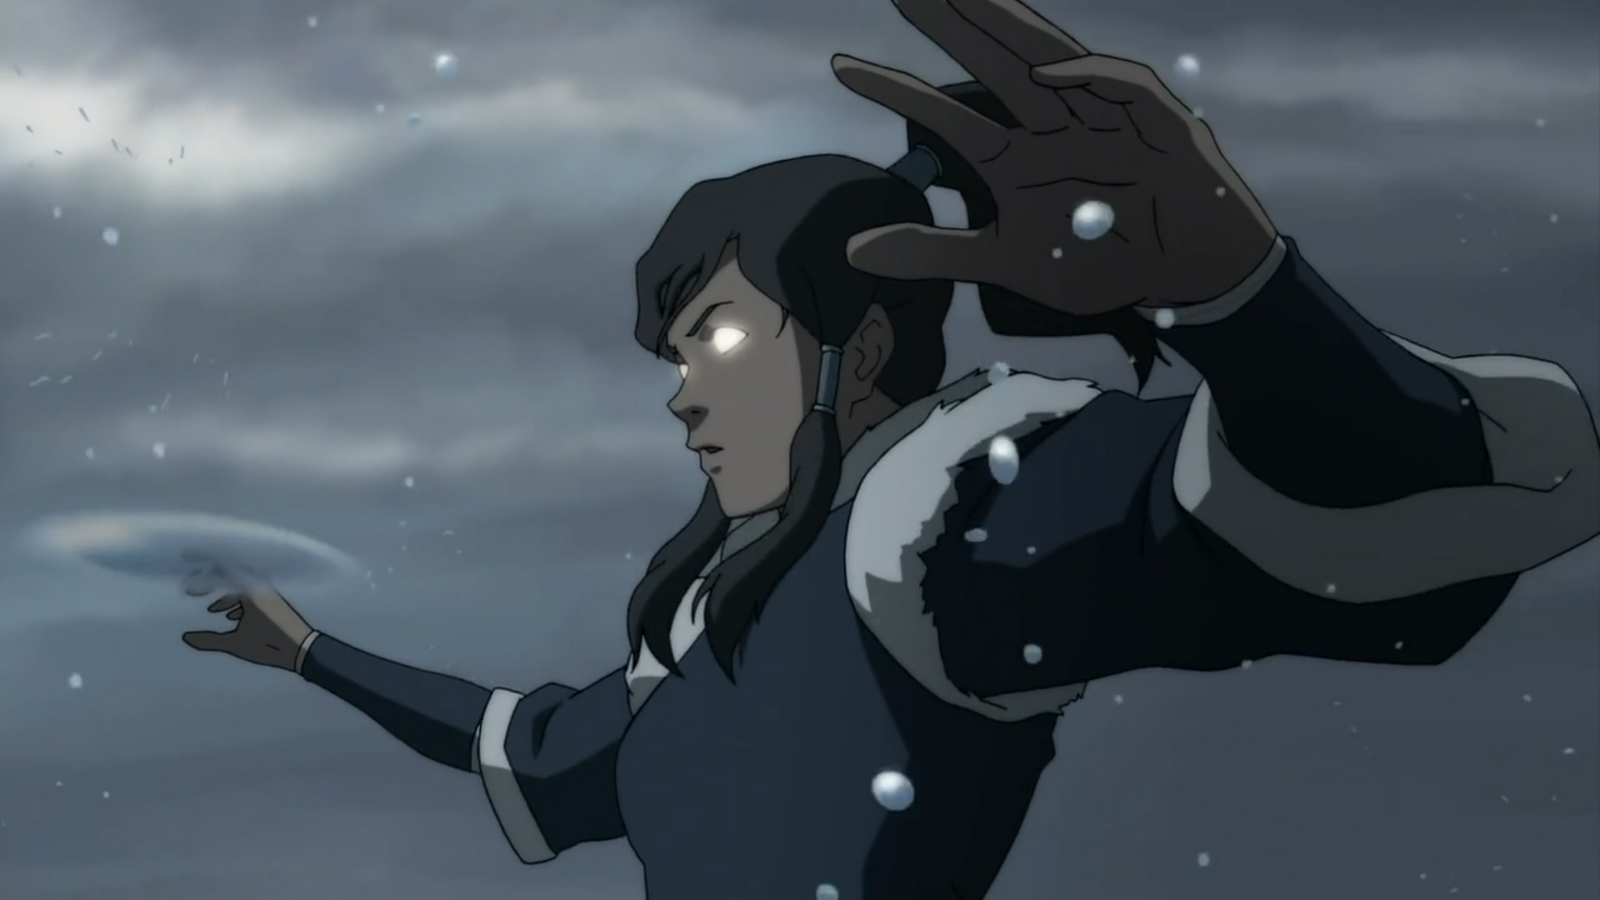 Korra in the Avatar State having finally connected with her spiritual